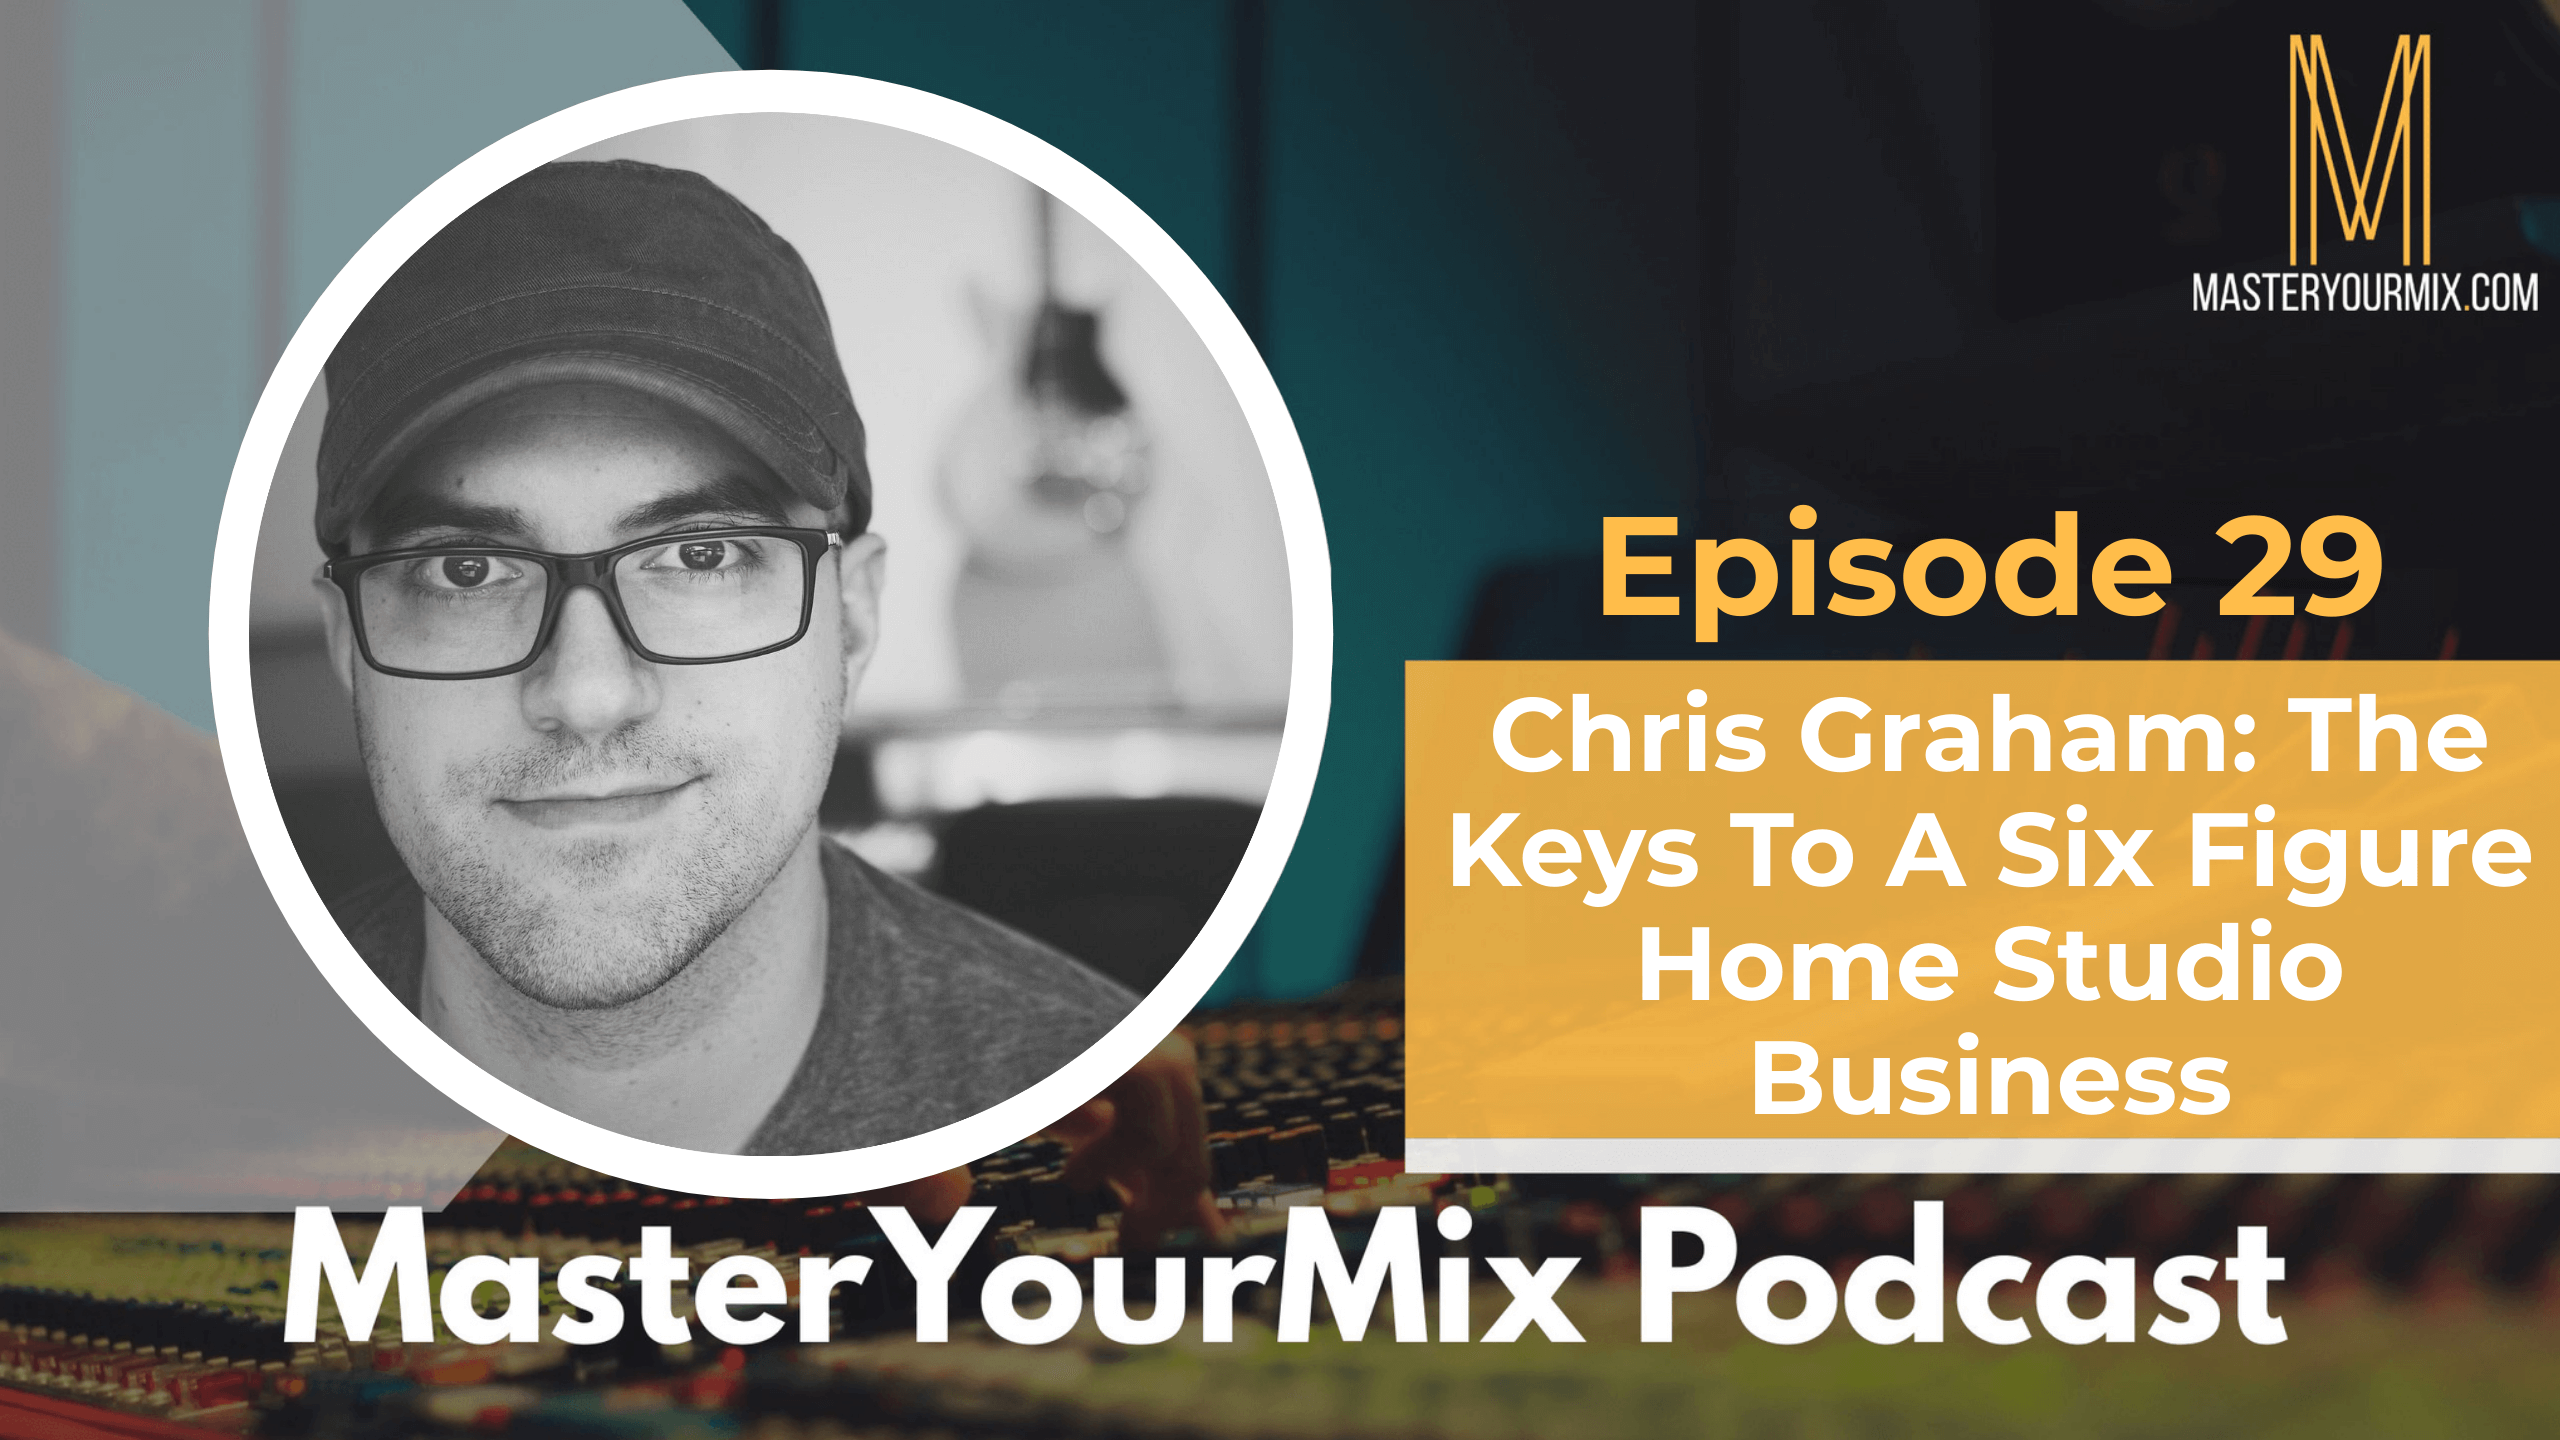 master your mix podcast, ep 29 chris graham